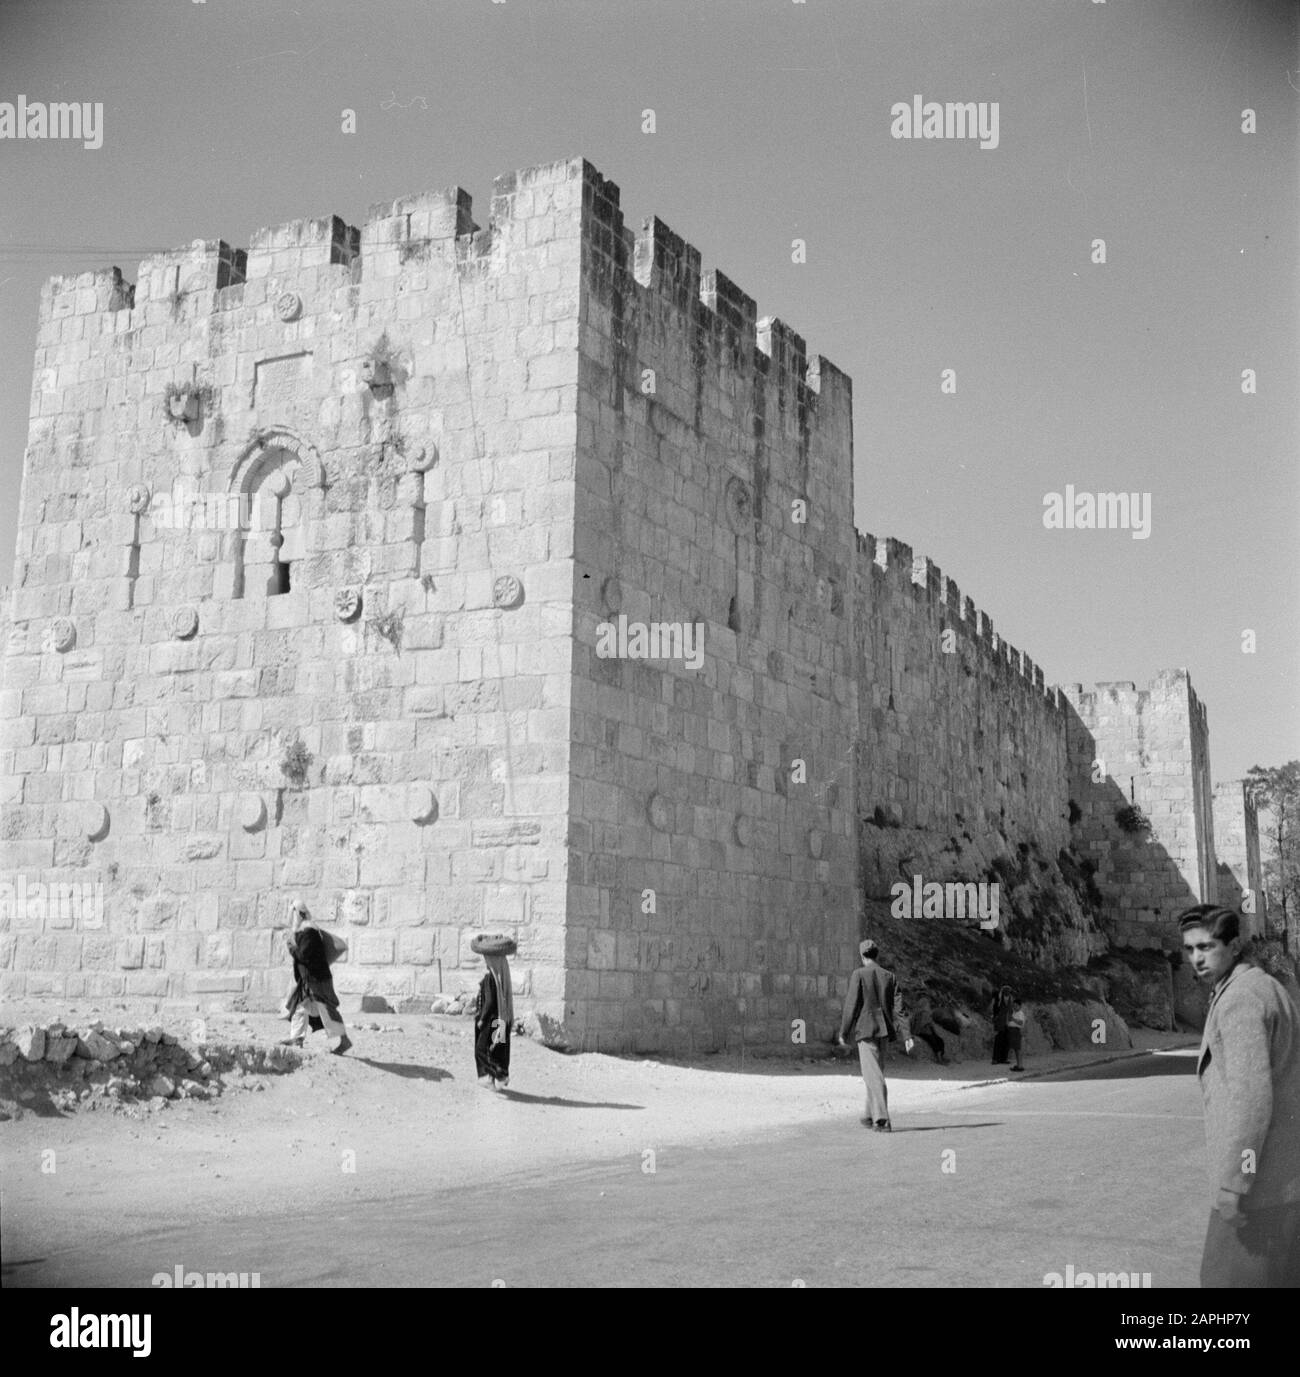 Middle East 1950-1955: Jerusalem Description: The wall of Jerusalem with the Stephen's Gate also called the Lion Gate Annotation: At the time of the recording this place was in Jordan Date: 1950 Location: Palestine, Jerusalem, Jordan Keywords: walls, gates Institution name: Stefanuspoort Stock Photo